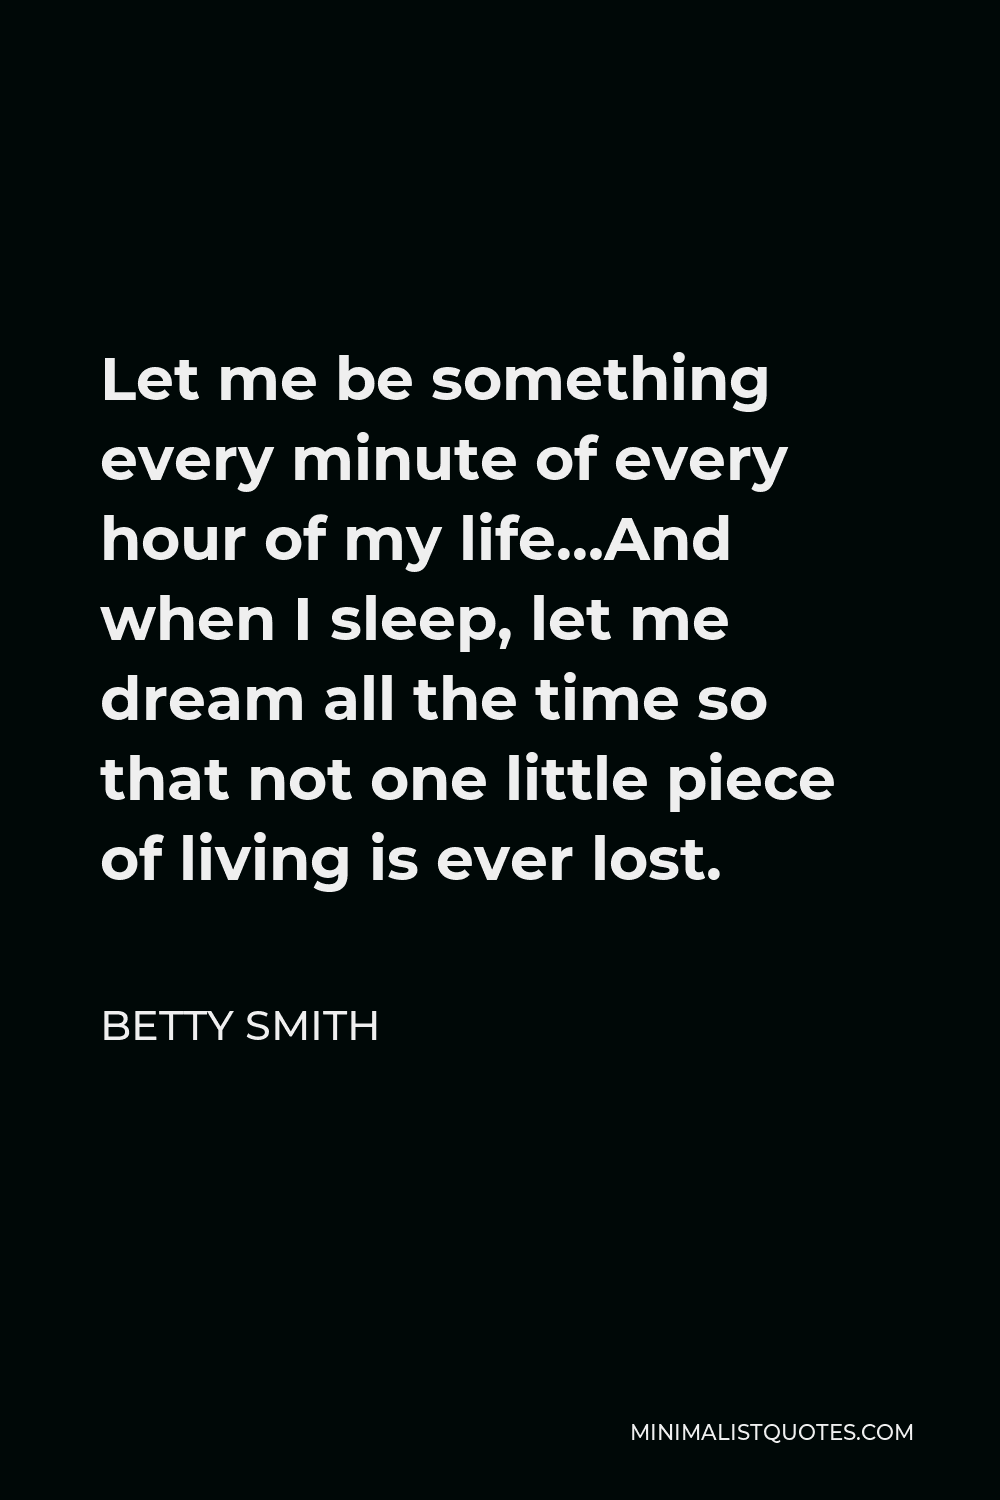 Betty Smith Quote - Let me be something every minute of every hour of my life…And when I sleep, let me dream all the time so that not one little piece of living is ever lost.